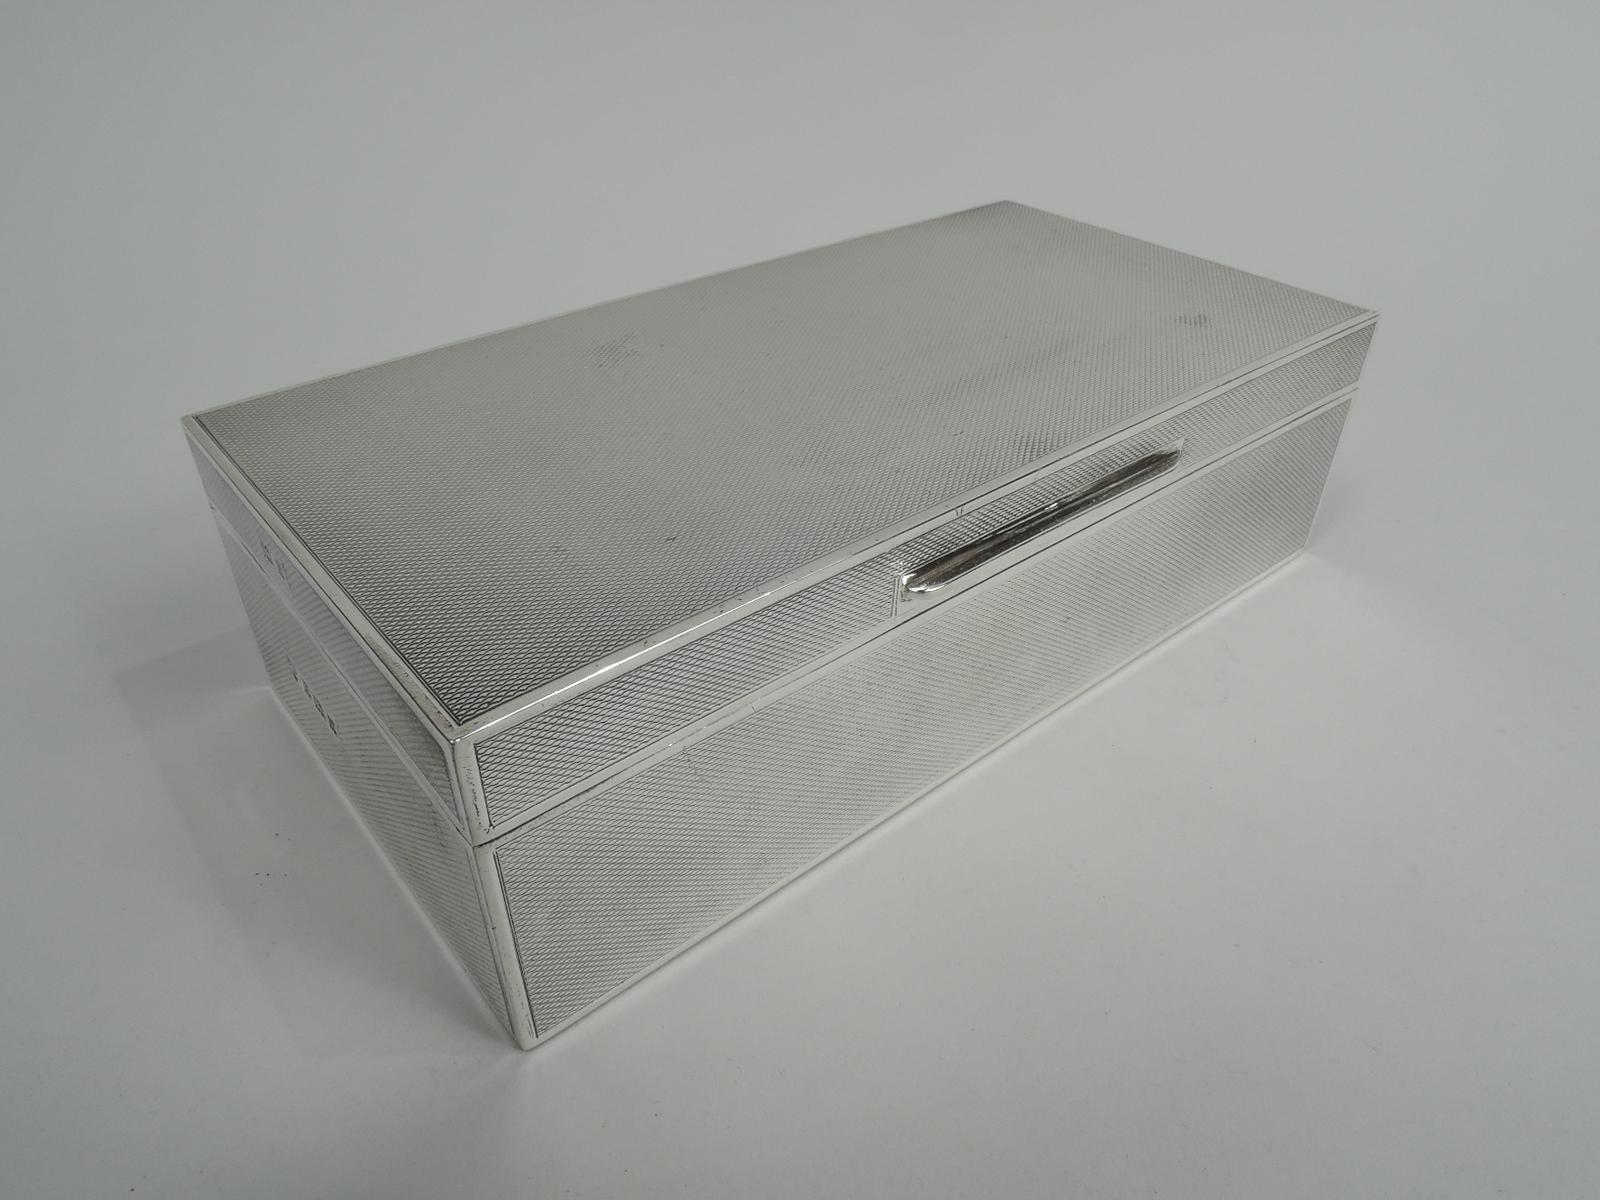 Art Deco sterling silver box. Made by C. J. Vander, Ltd in Birmingham in 1970. Rectangular with straight sides. Cover flat, hinged, and tabbed. Allover engine-turned ornament in plain borders. Box and cover interior cedar lined and partitioned. Box